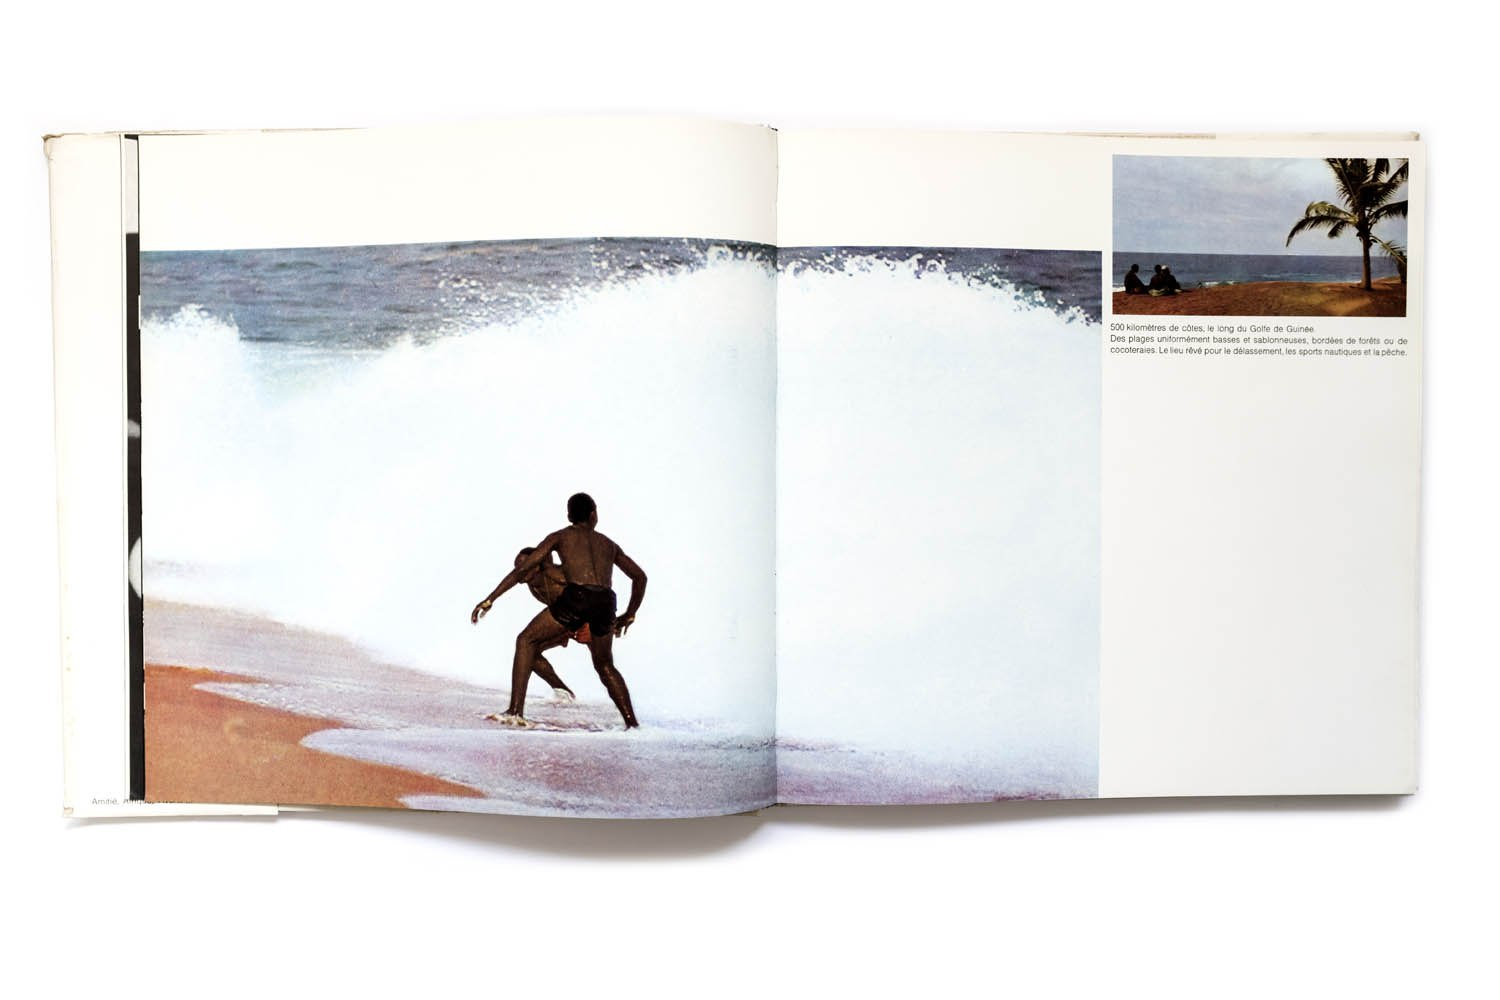 Spread from Côte d’Ivoire (1967) by French photographer Roger Espinat